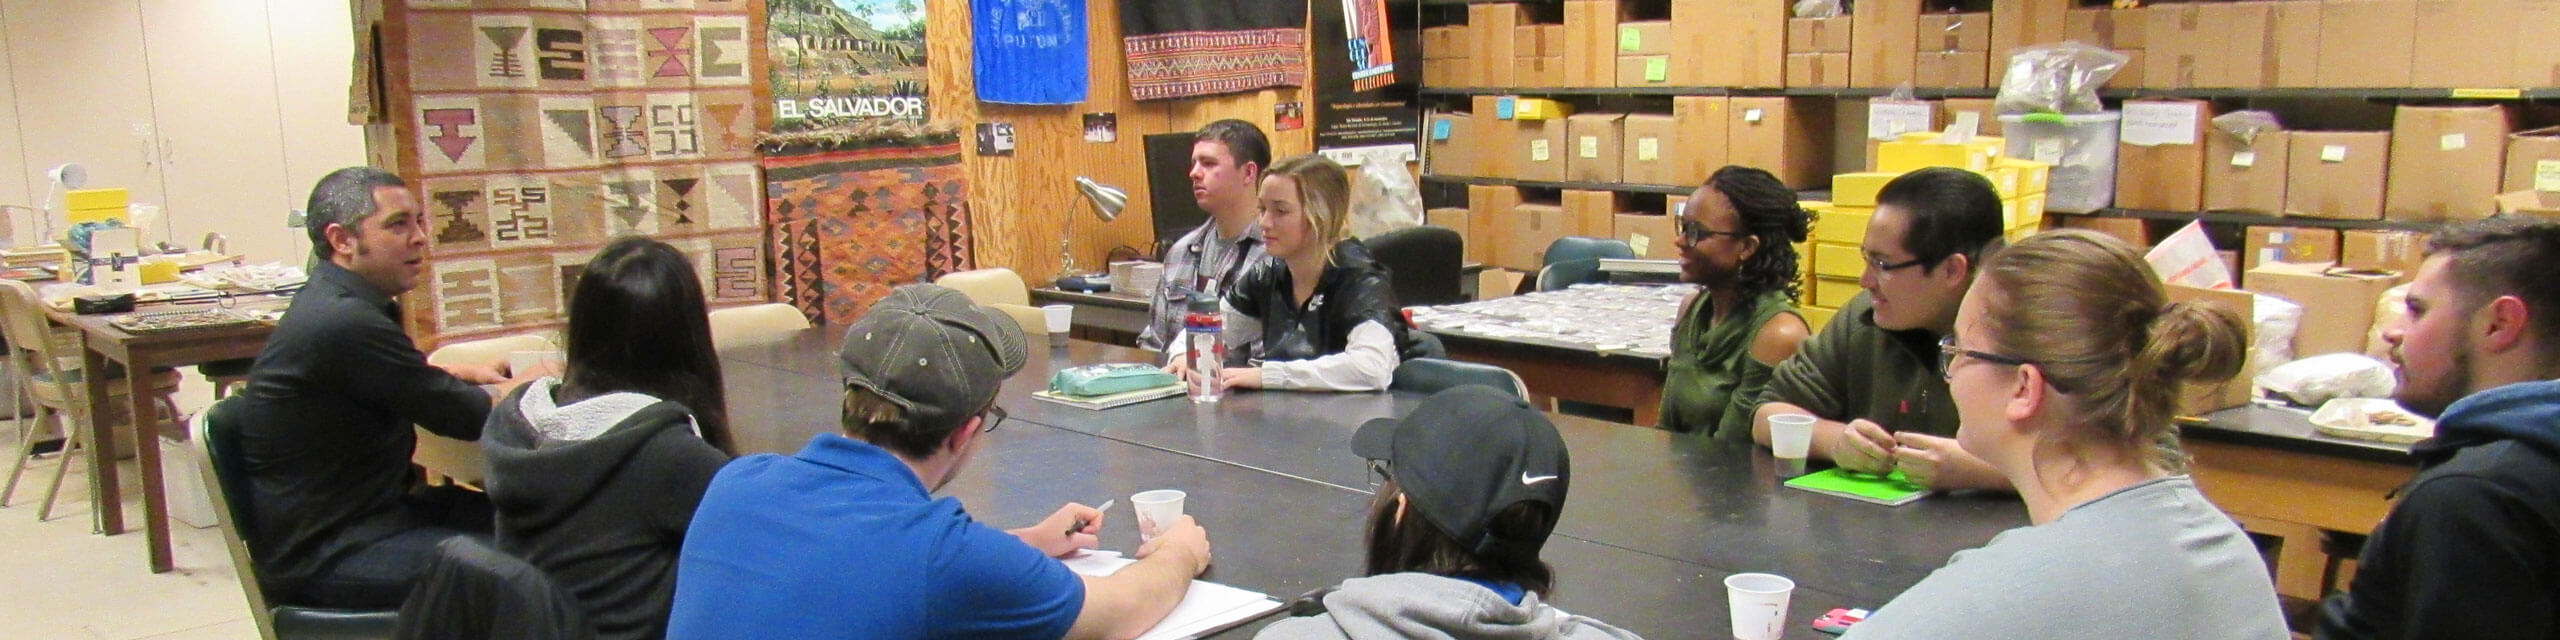 A small anthropology class gathers around a table, listening intently to their professor.